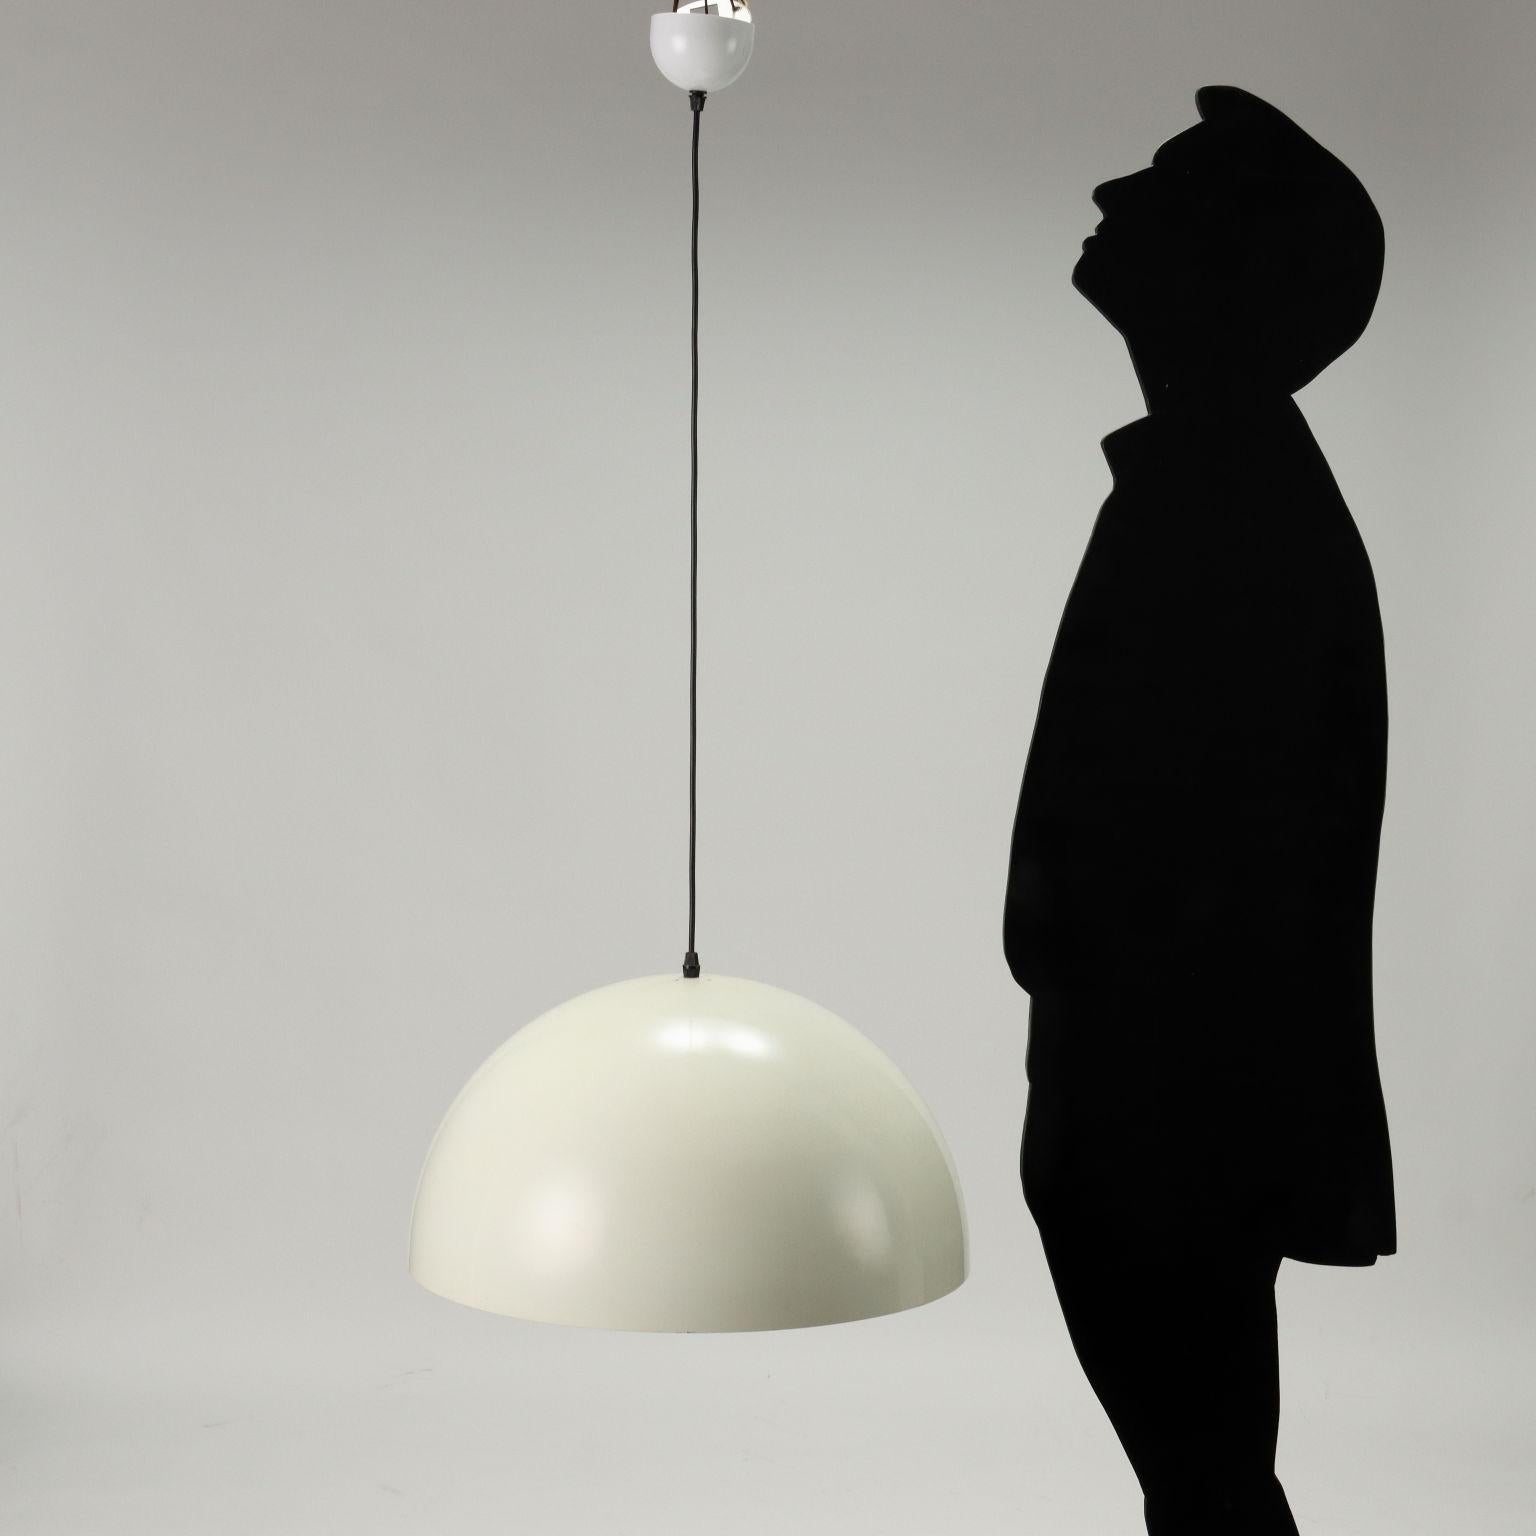 Suspension lamp model 'Sonora' designed by Vico Magistretti in 1976. Small version with direct and diffused light, with metal diffuser.